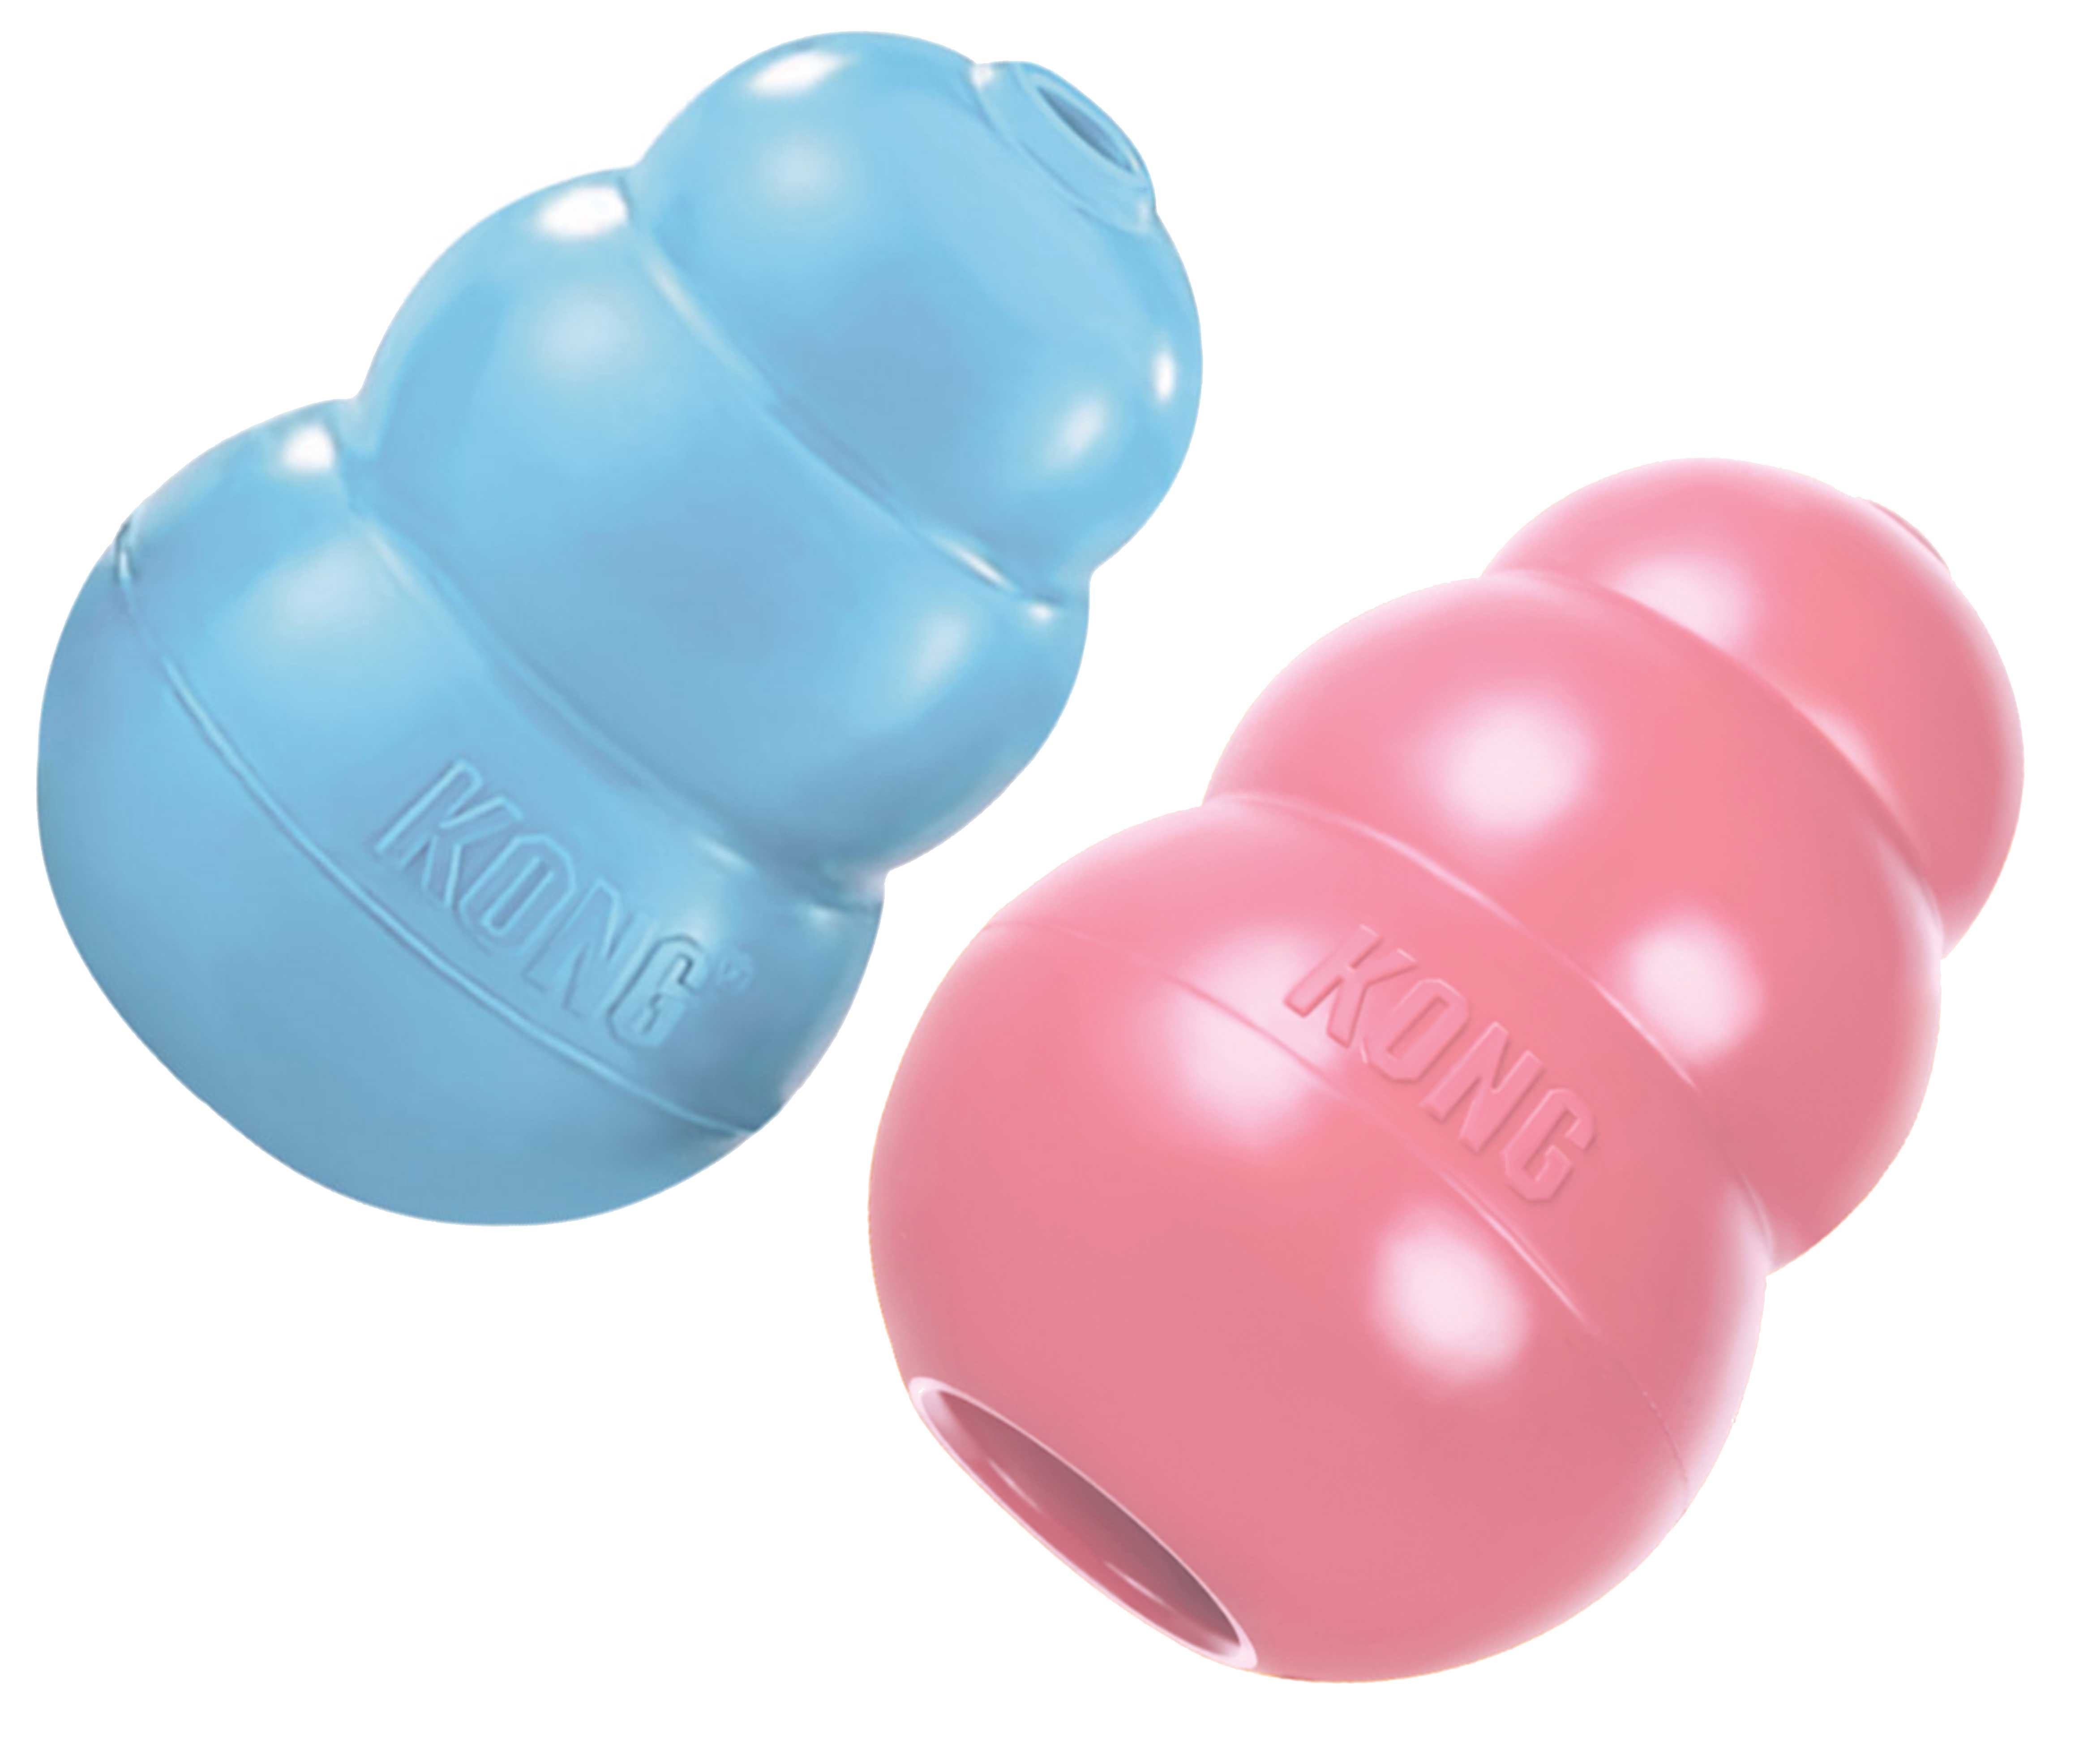 Kong Puppy Small (7cm) Blue/Pink